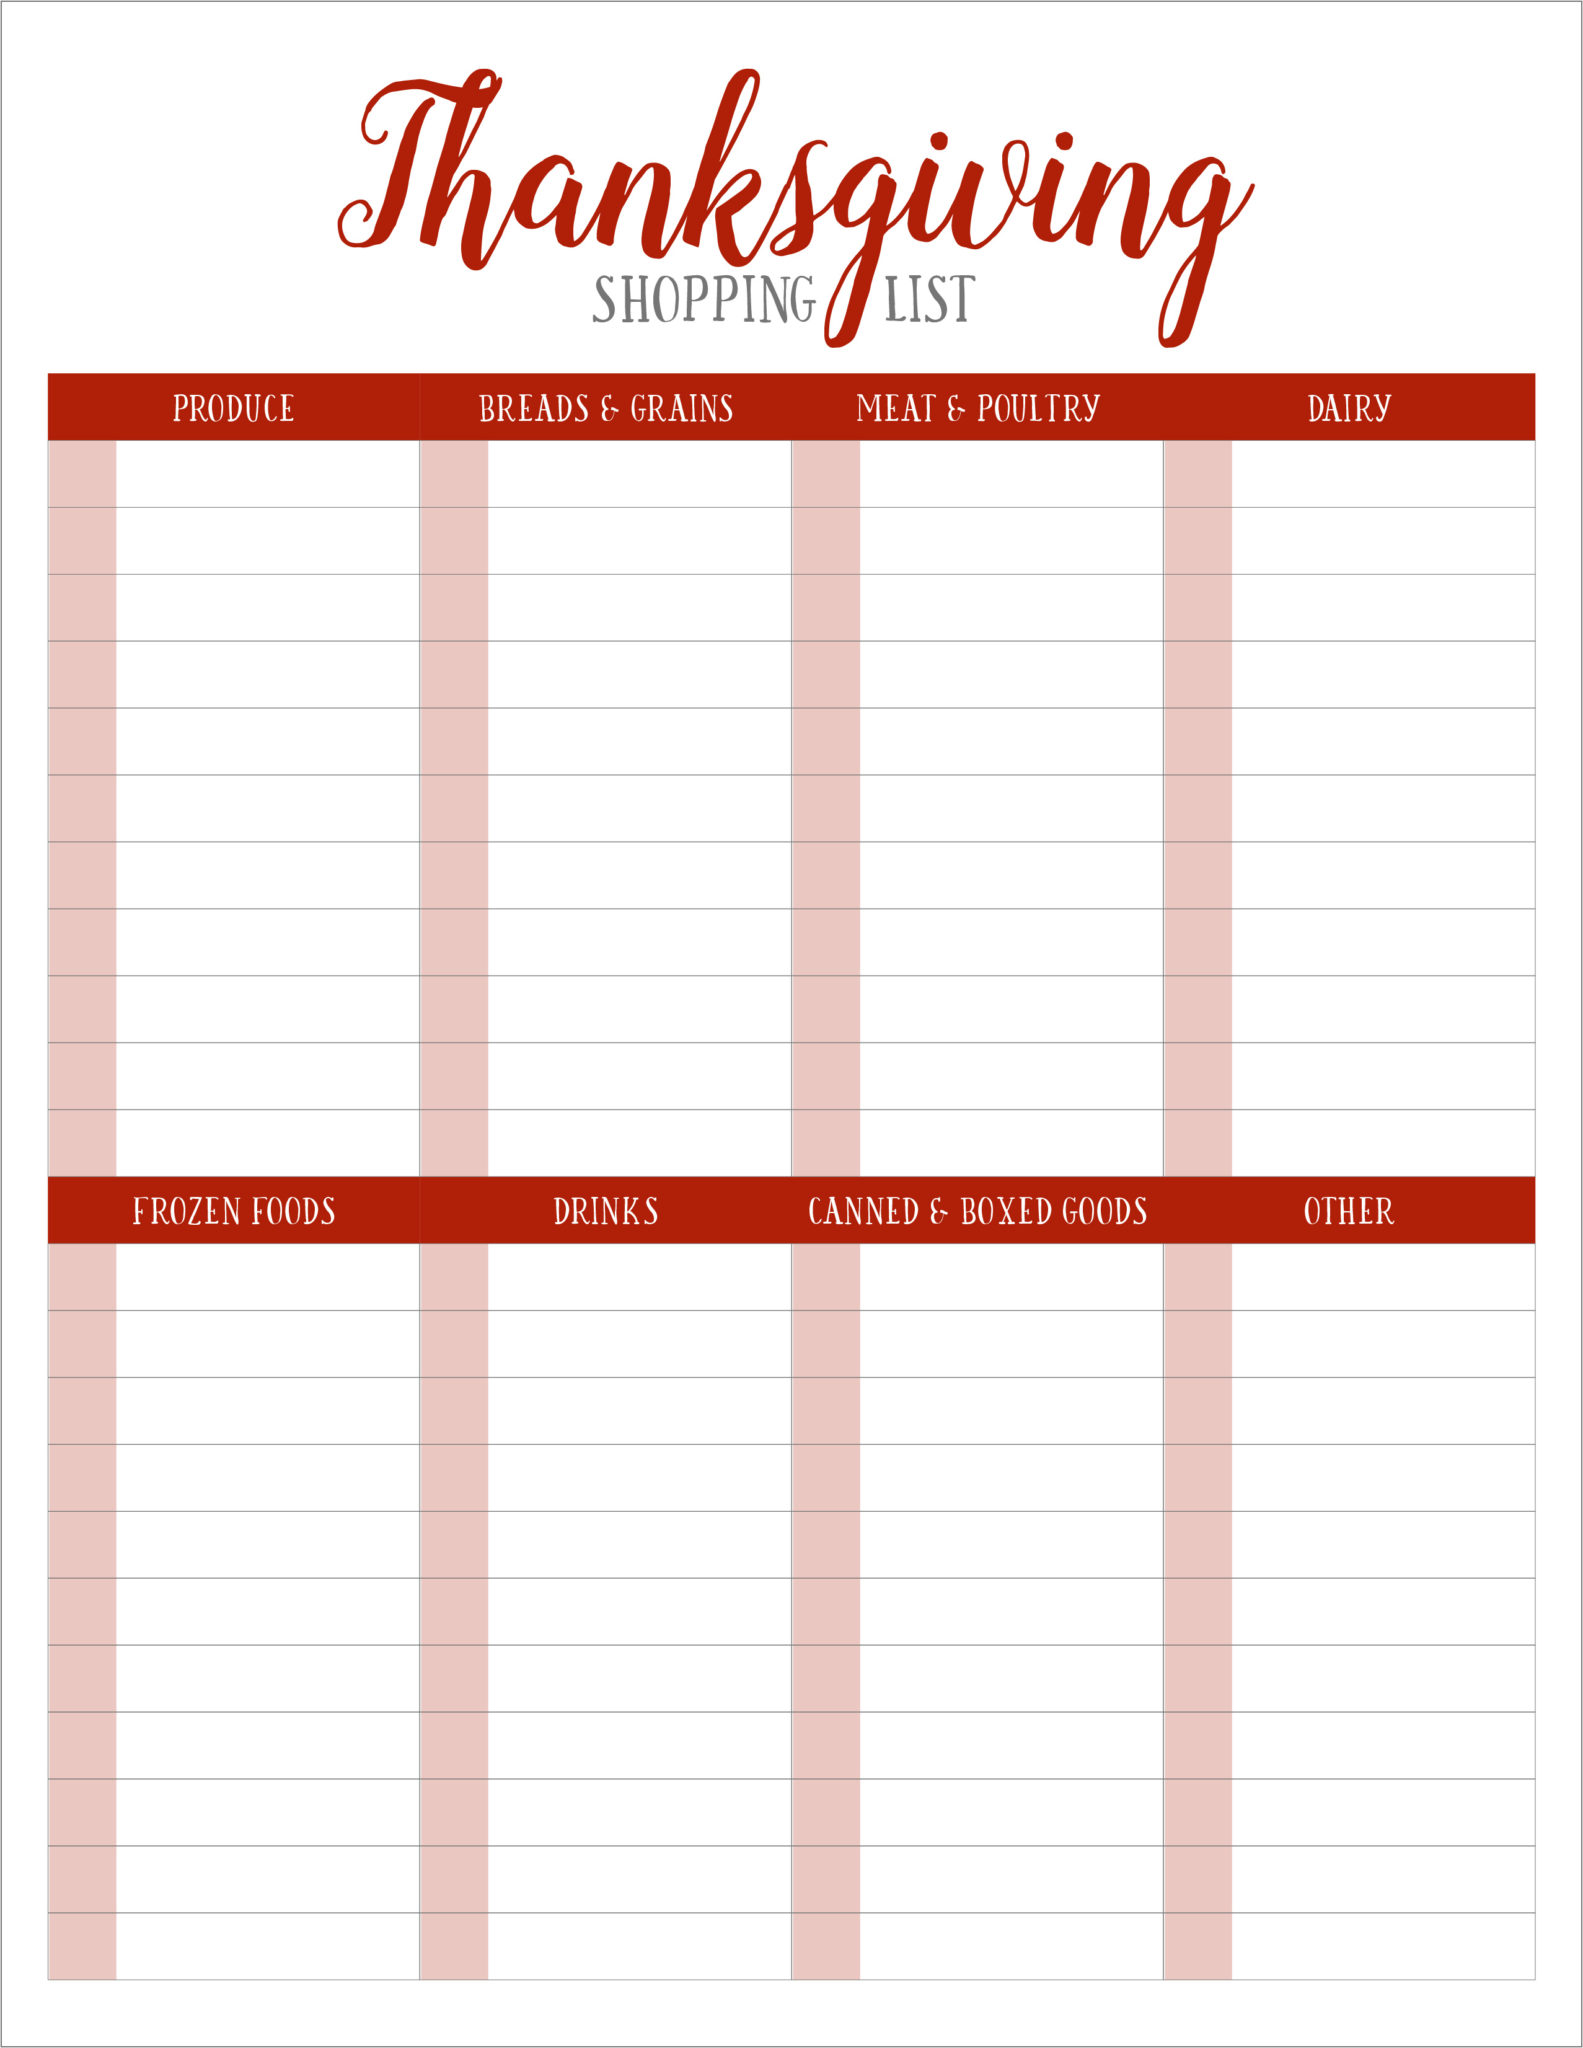 Thanksgiving Meal Planners & Shopping List Printables - FREE | Live ...